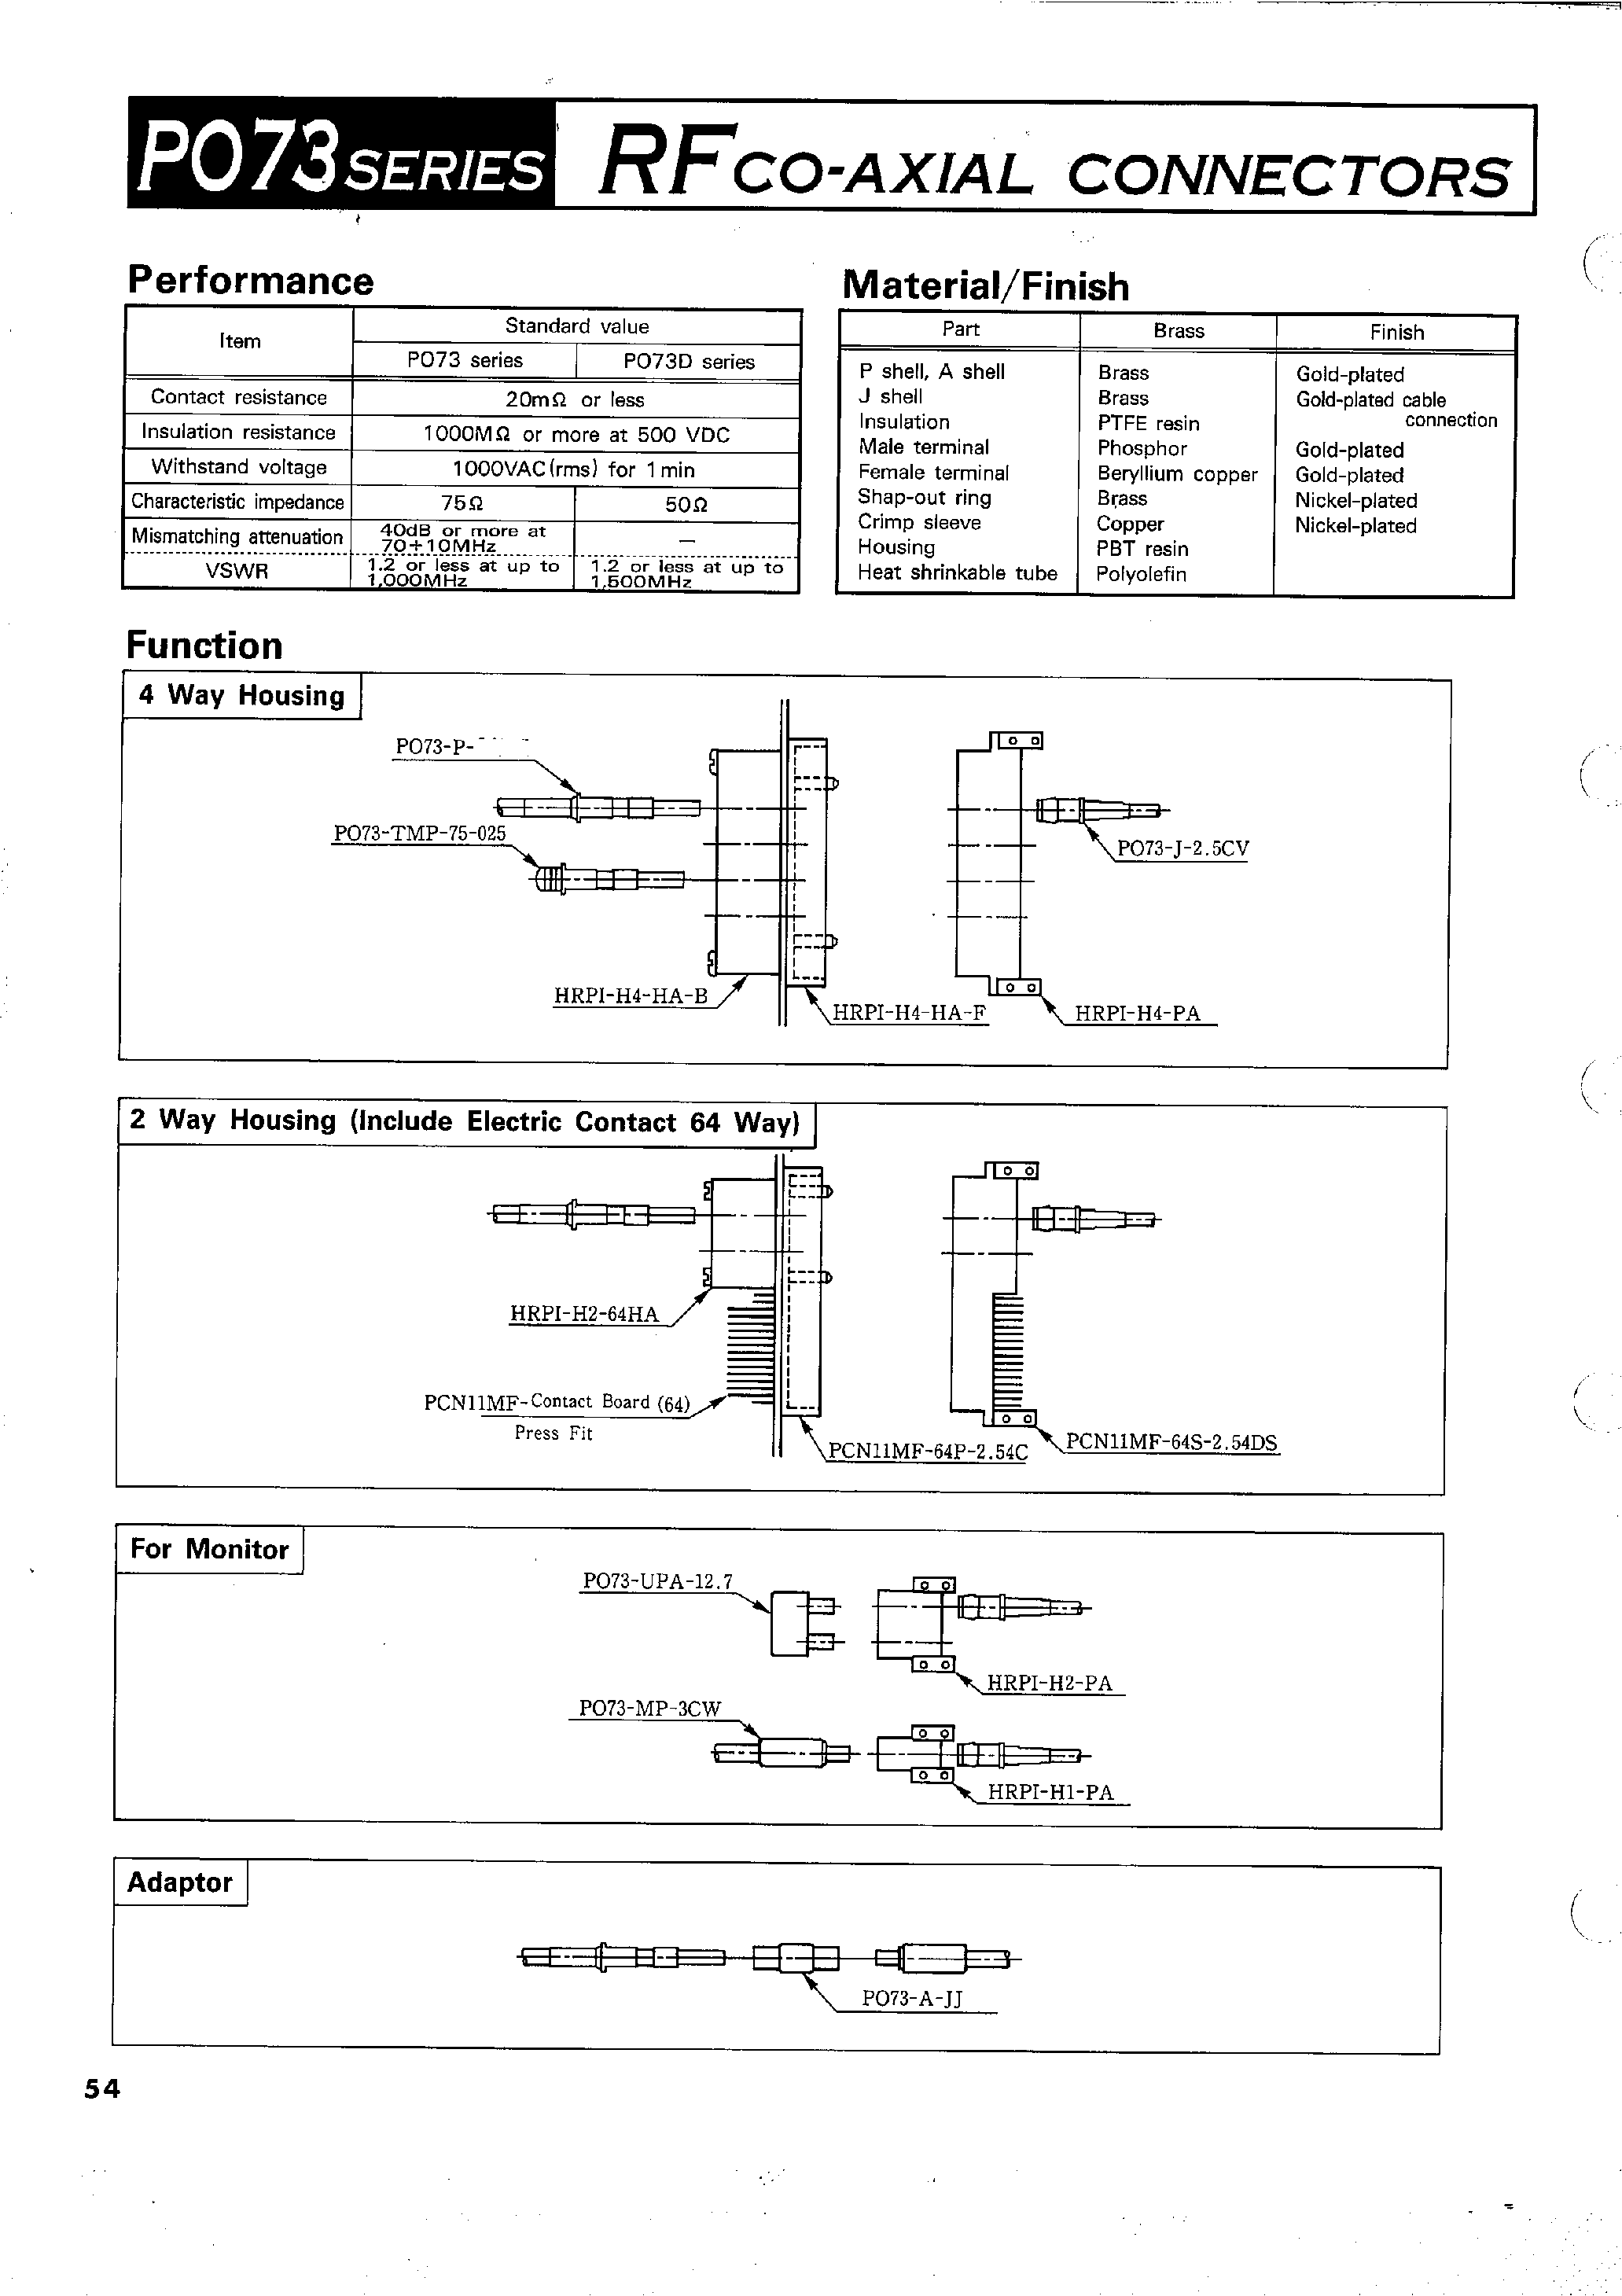 Datasheet PO73-P-3CW - RFCO-AXIAL CONNECTORS(COAXIAL CONNECTORS for use with HRPI) page 2